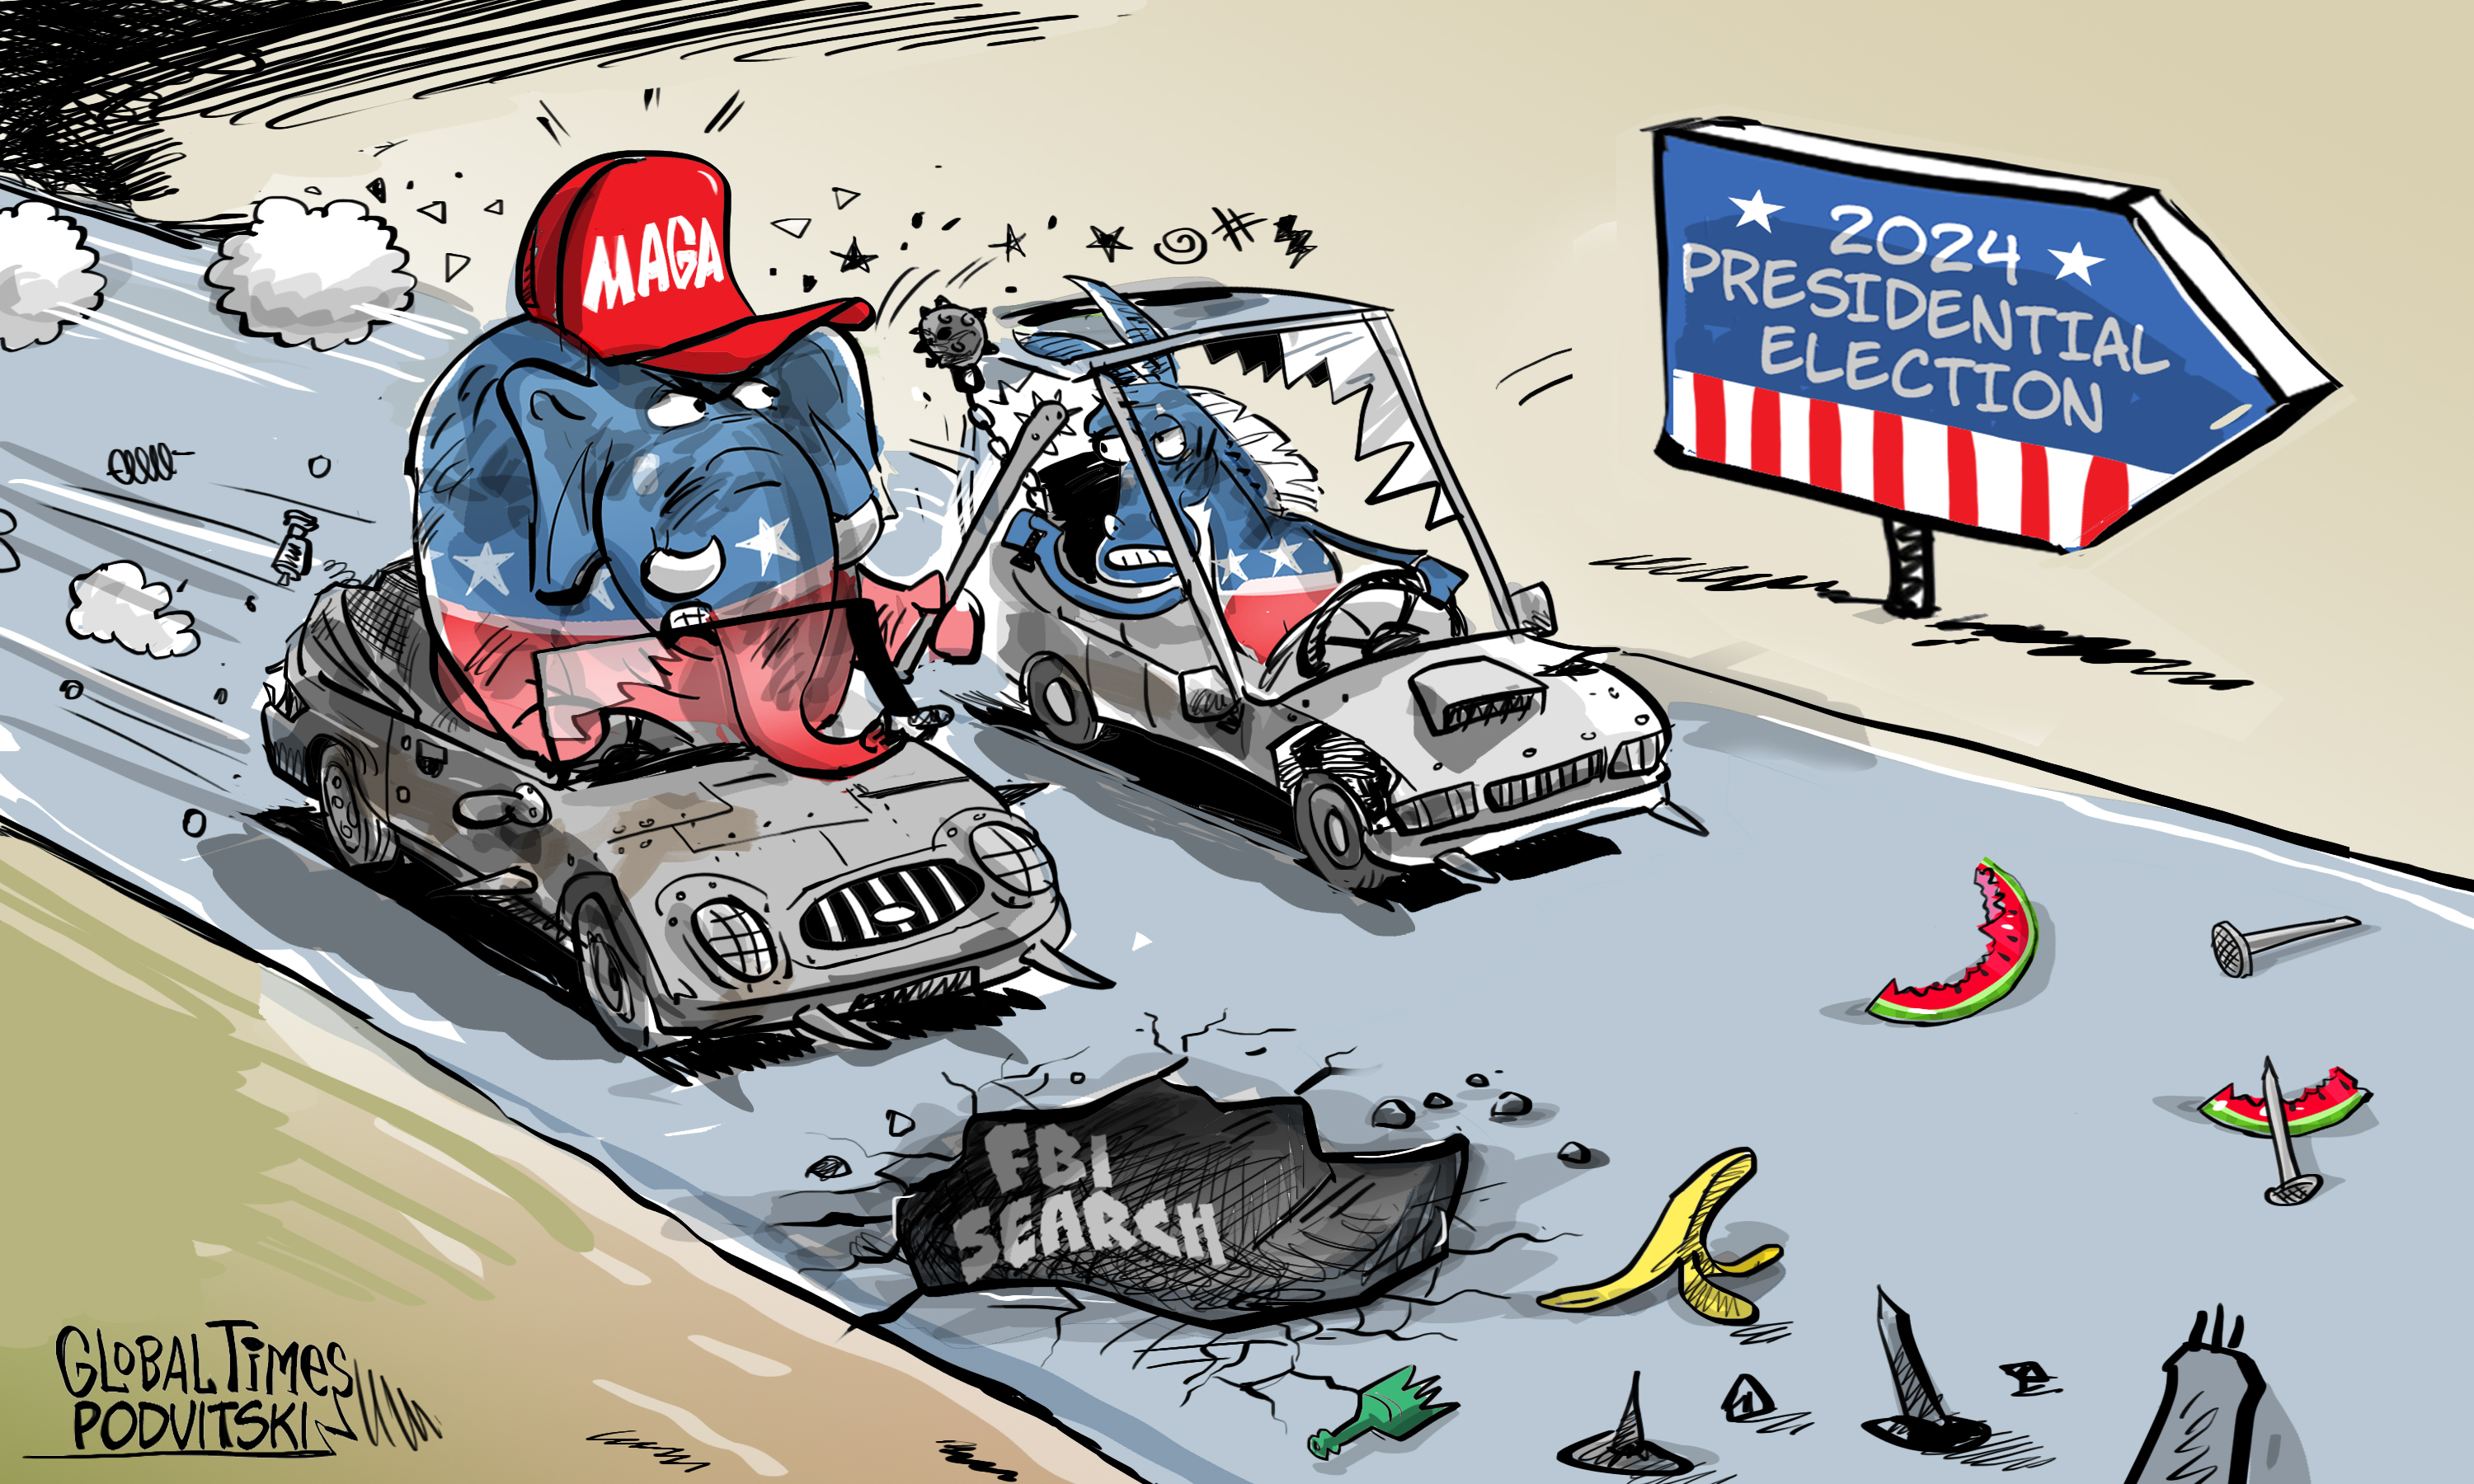 US partisan conflicts escalate as both parties target the 2024 presidential election. Cartoon: Vitaly Podvitski